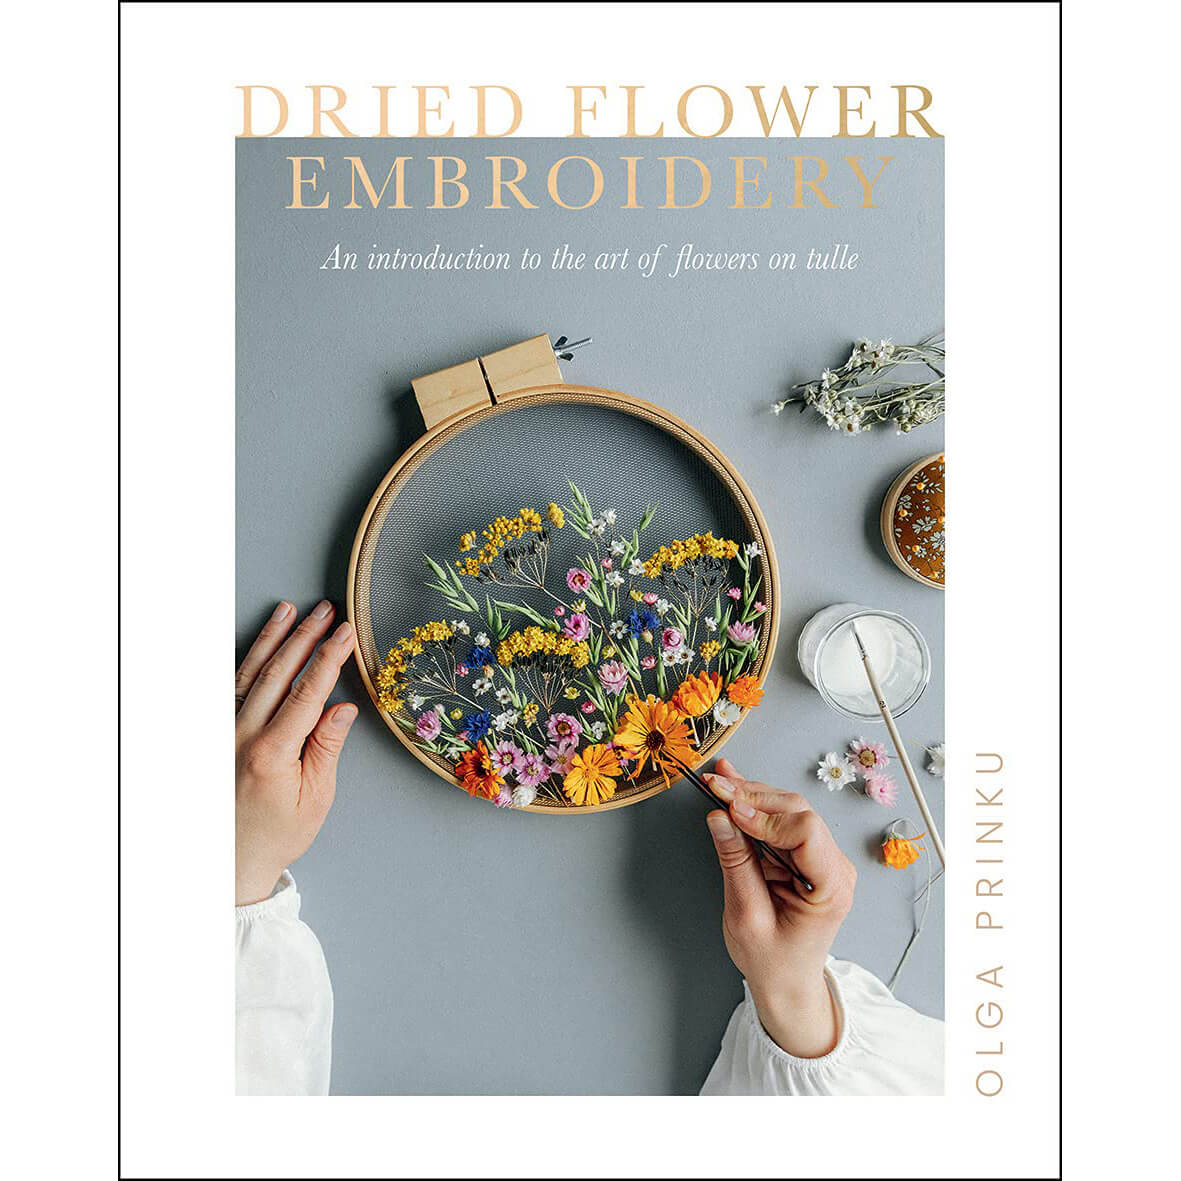 Dried Flower Embroidery: An Introduction to the Art of Flowers on Tulle front cover.